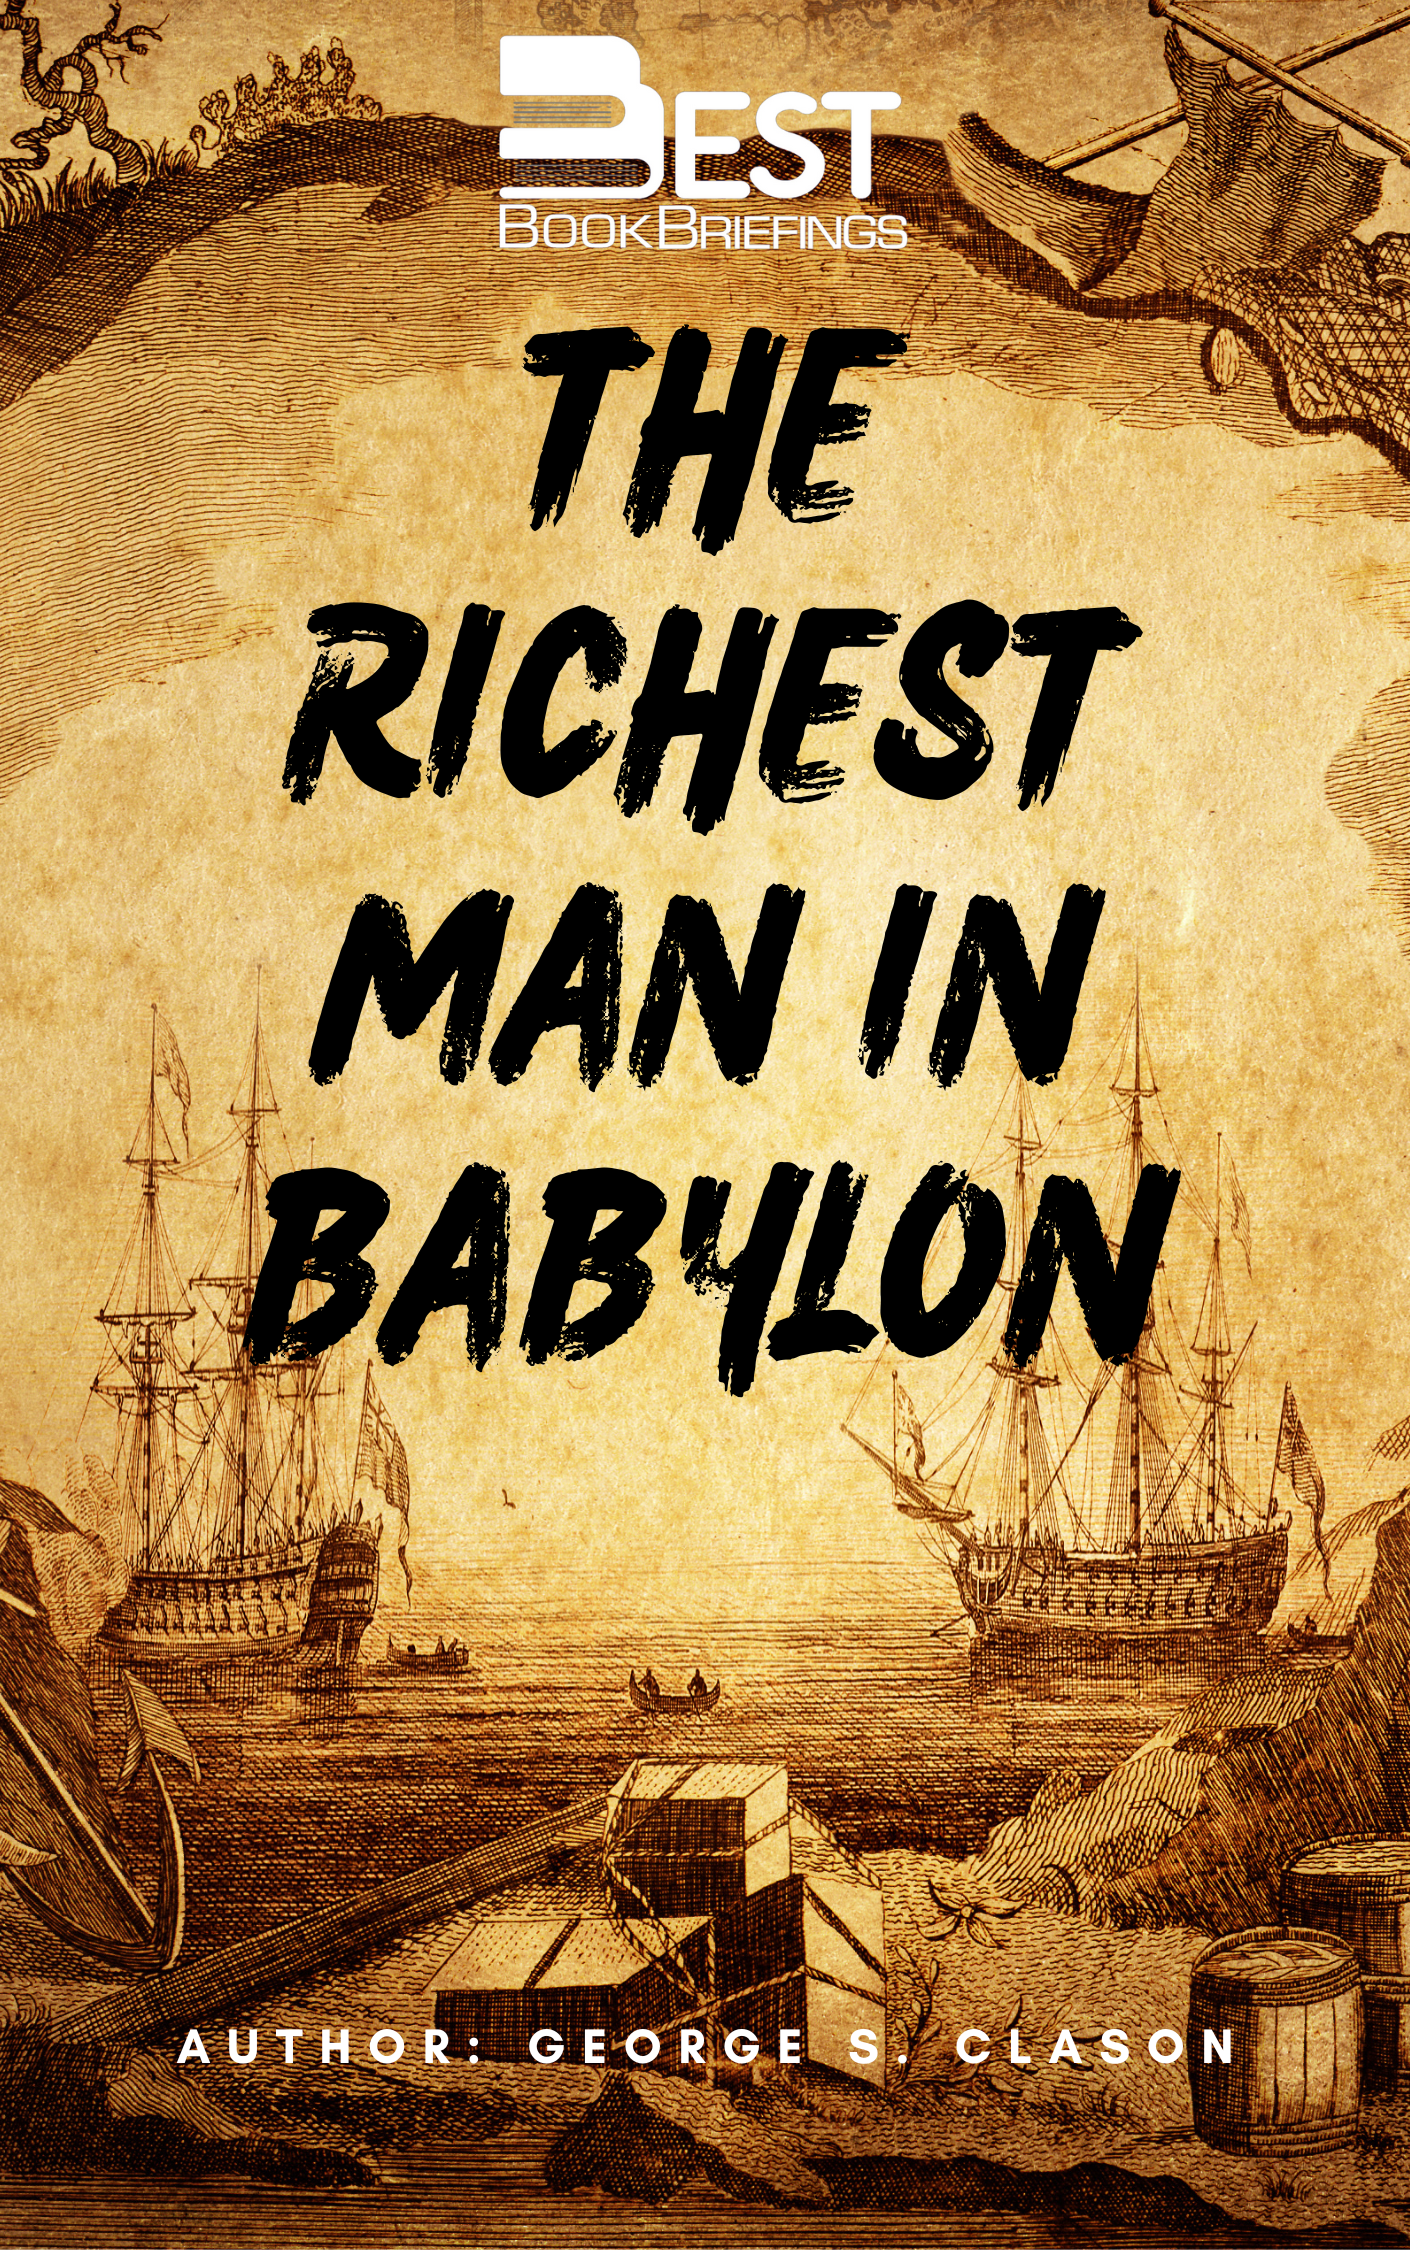 The ancient Babylonians were the first people to discover the universal laws of prosperity. In his classic bestseller,  The Richest Man in Babylon,  George S. Clason reveals their secrets for creating, growing, and preserving wealth.Through these entertaining tales of merchants, tradesmen, and herdsmen, you'll learn how to keep more out what 